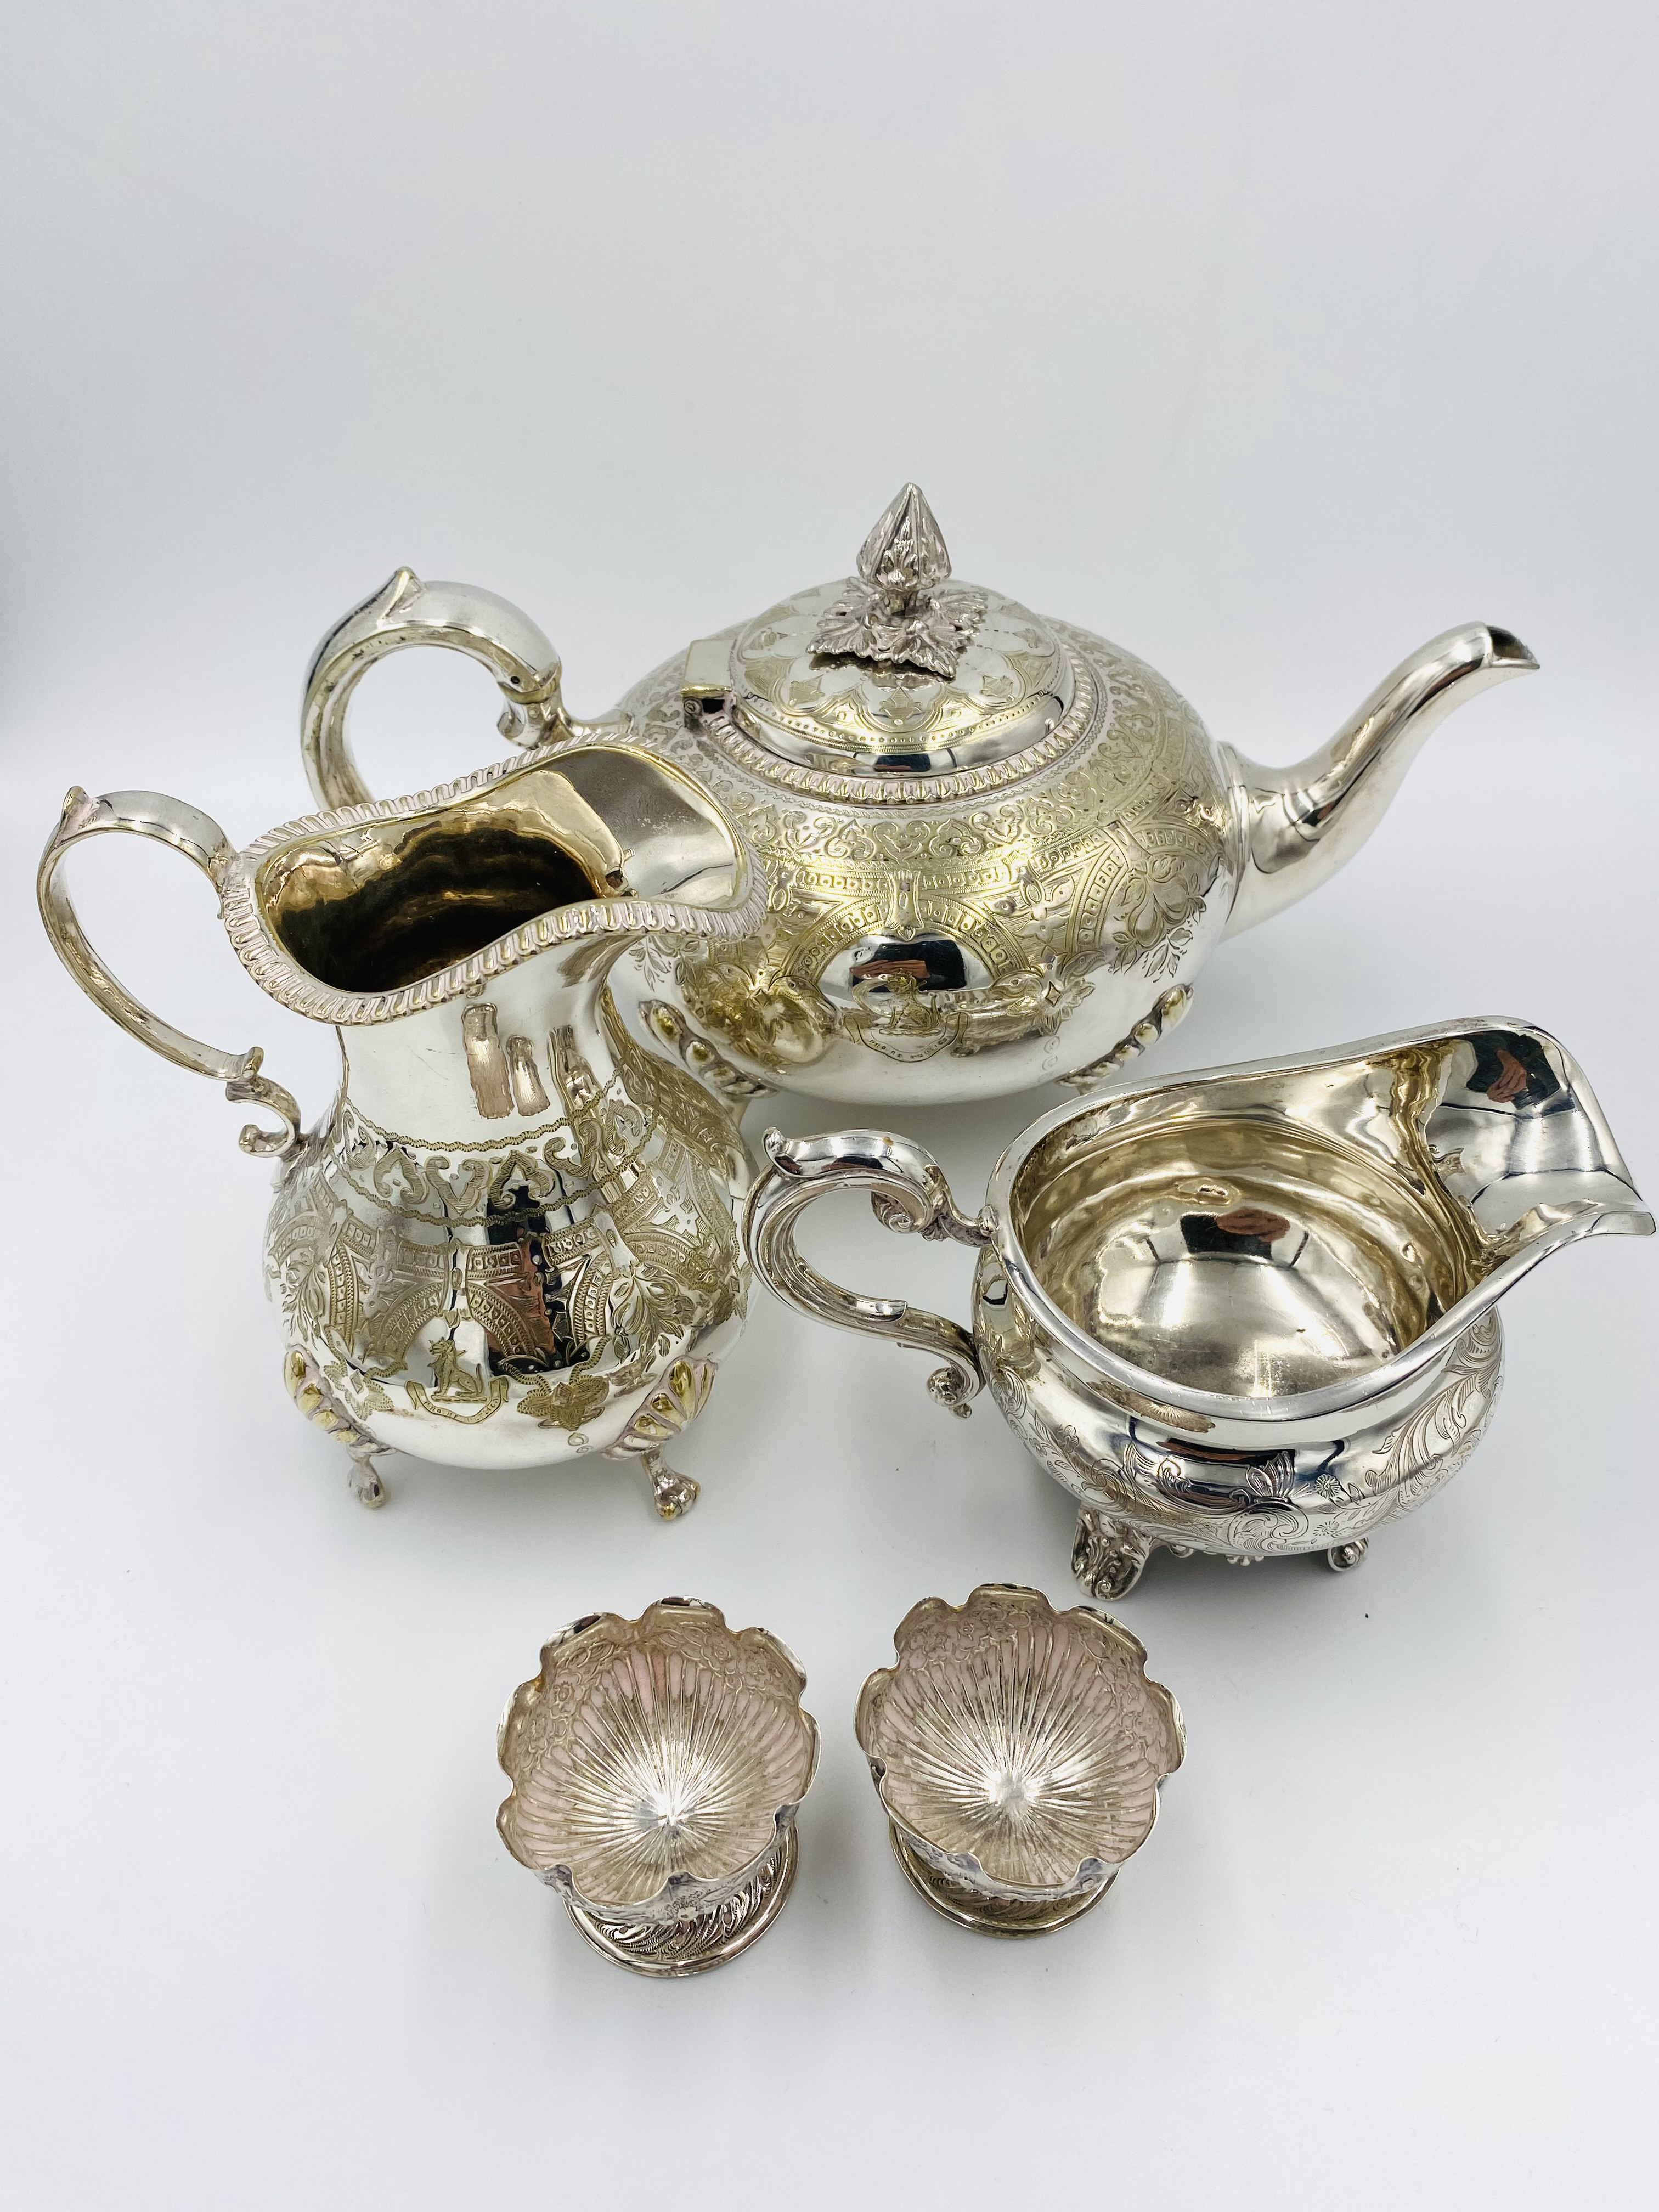 Victorian silver milk jug, pair of silver egg cups and a silver plate teapot - Image 2 of 5